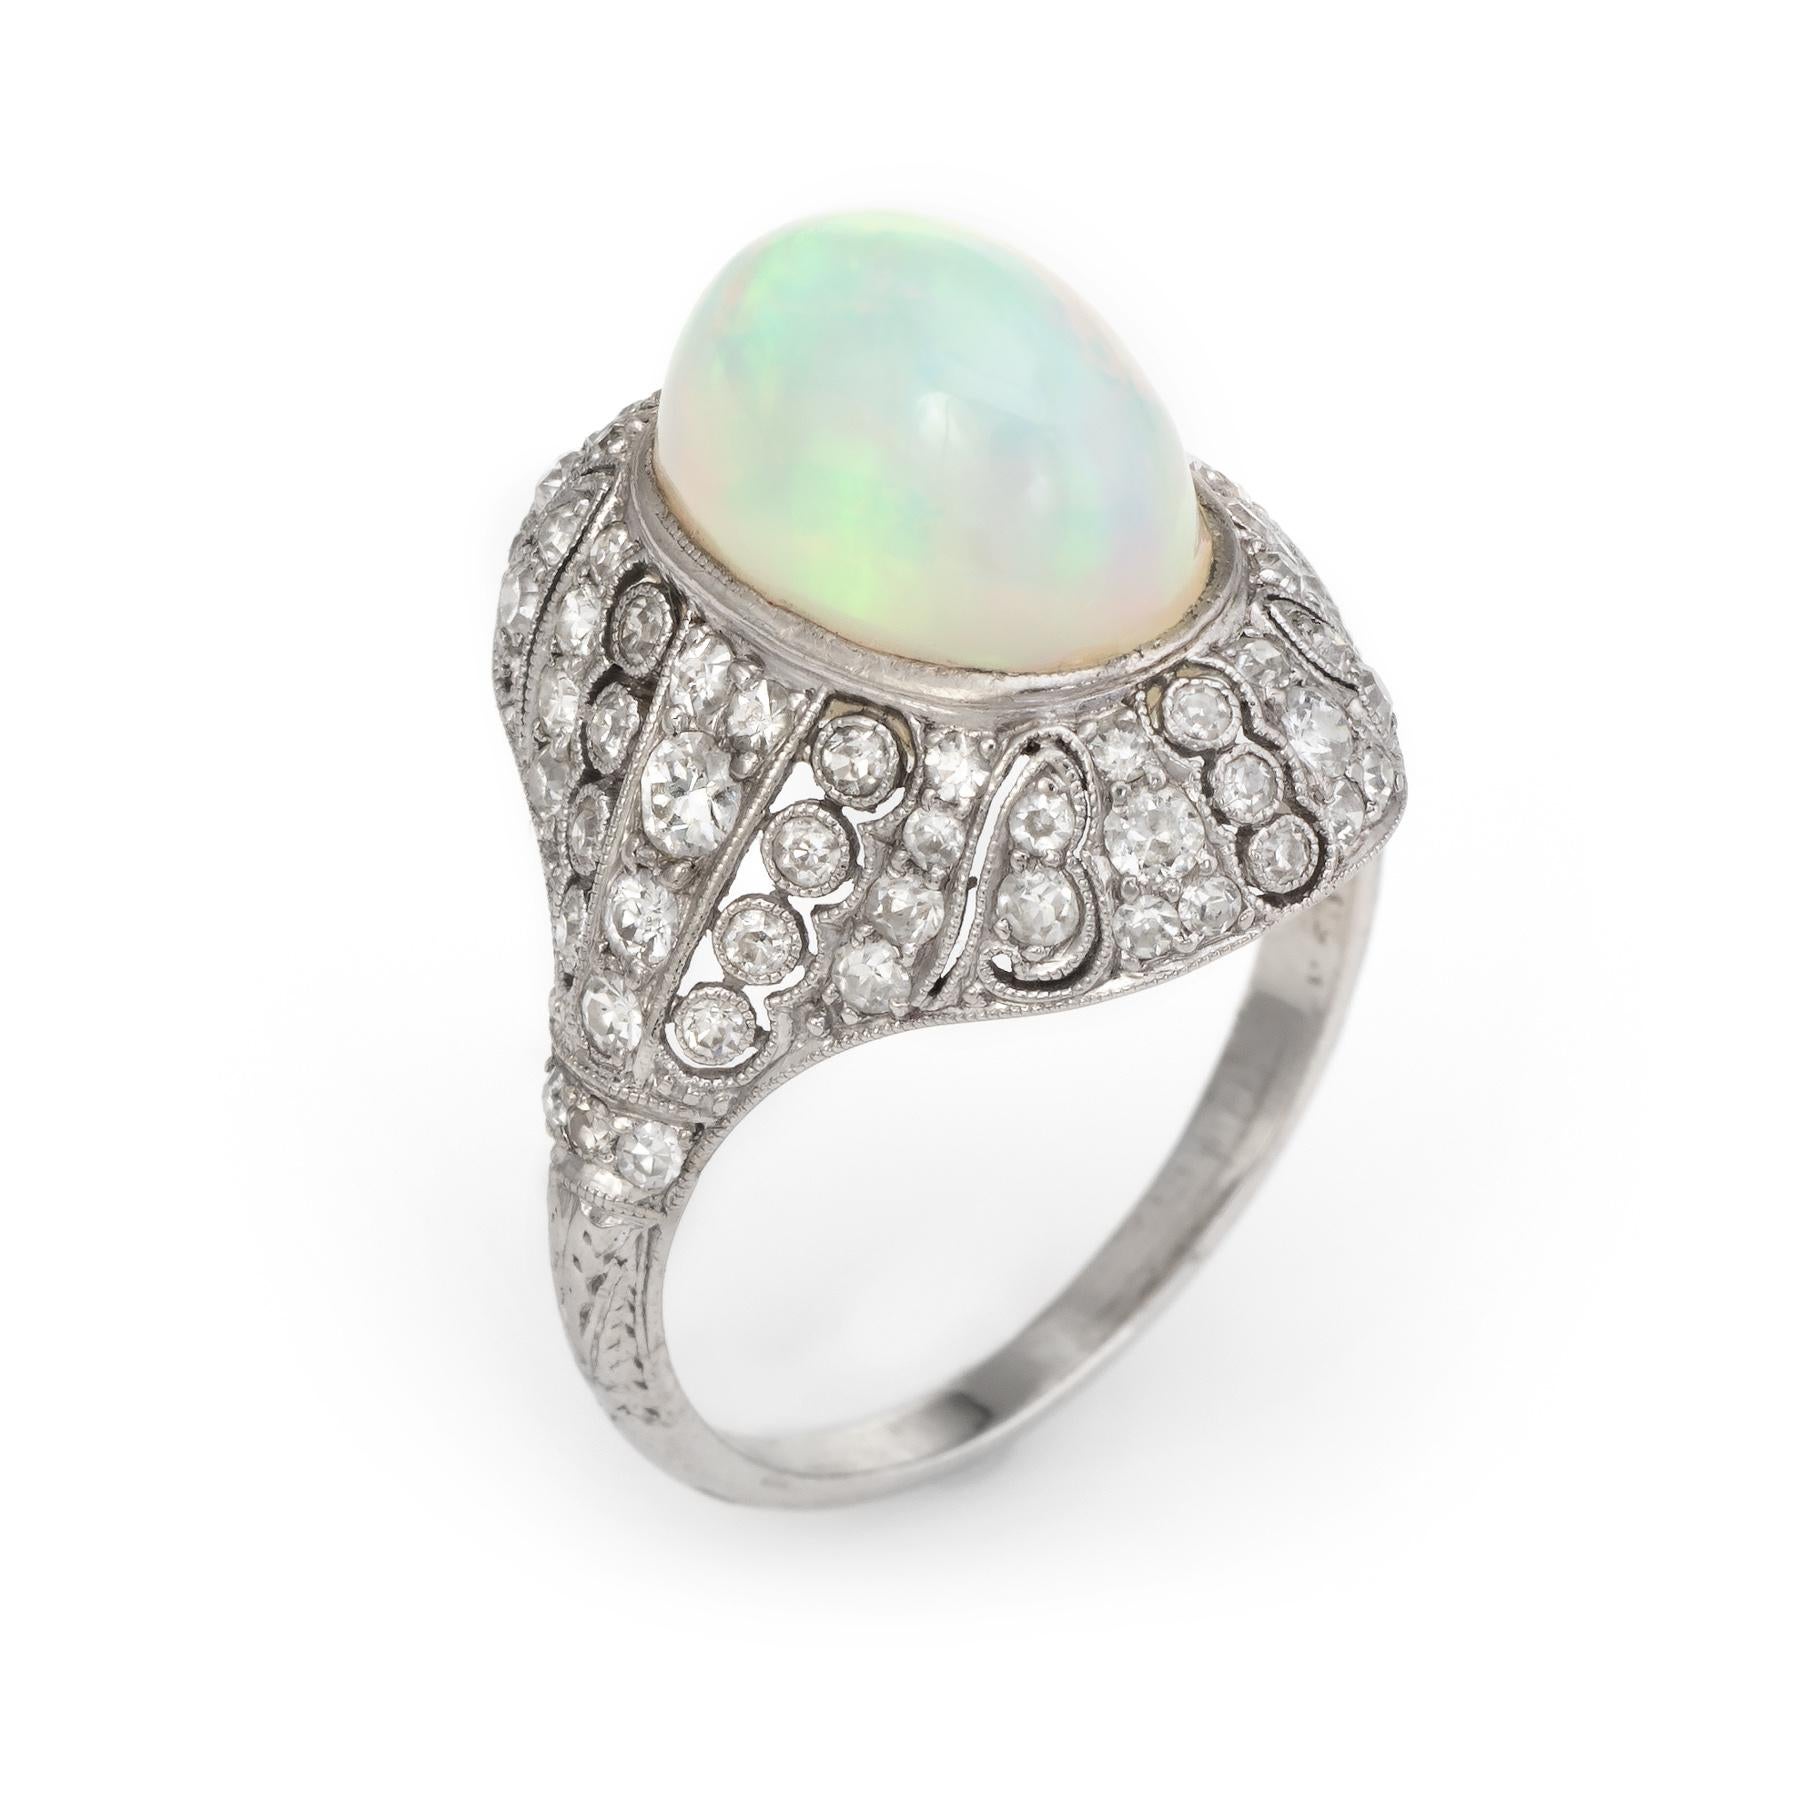 Elegant & finely detailed Art Deco era ring (circa 1920s to 1930s), crafted in 900 platinum. 

Centrally mounted natural opal measures 12mm x 8mm (estimated at 4 carats), accented with 78 graduated single & old mine cut diamonds totaling an